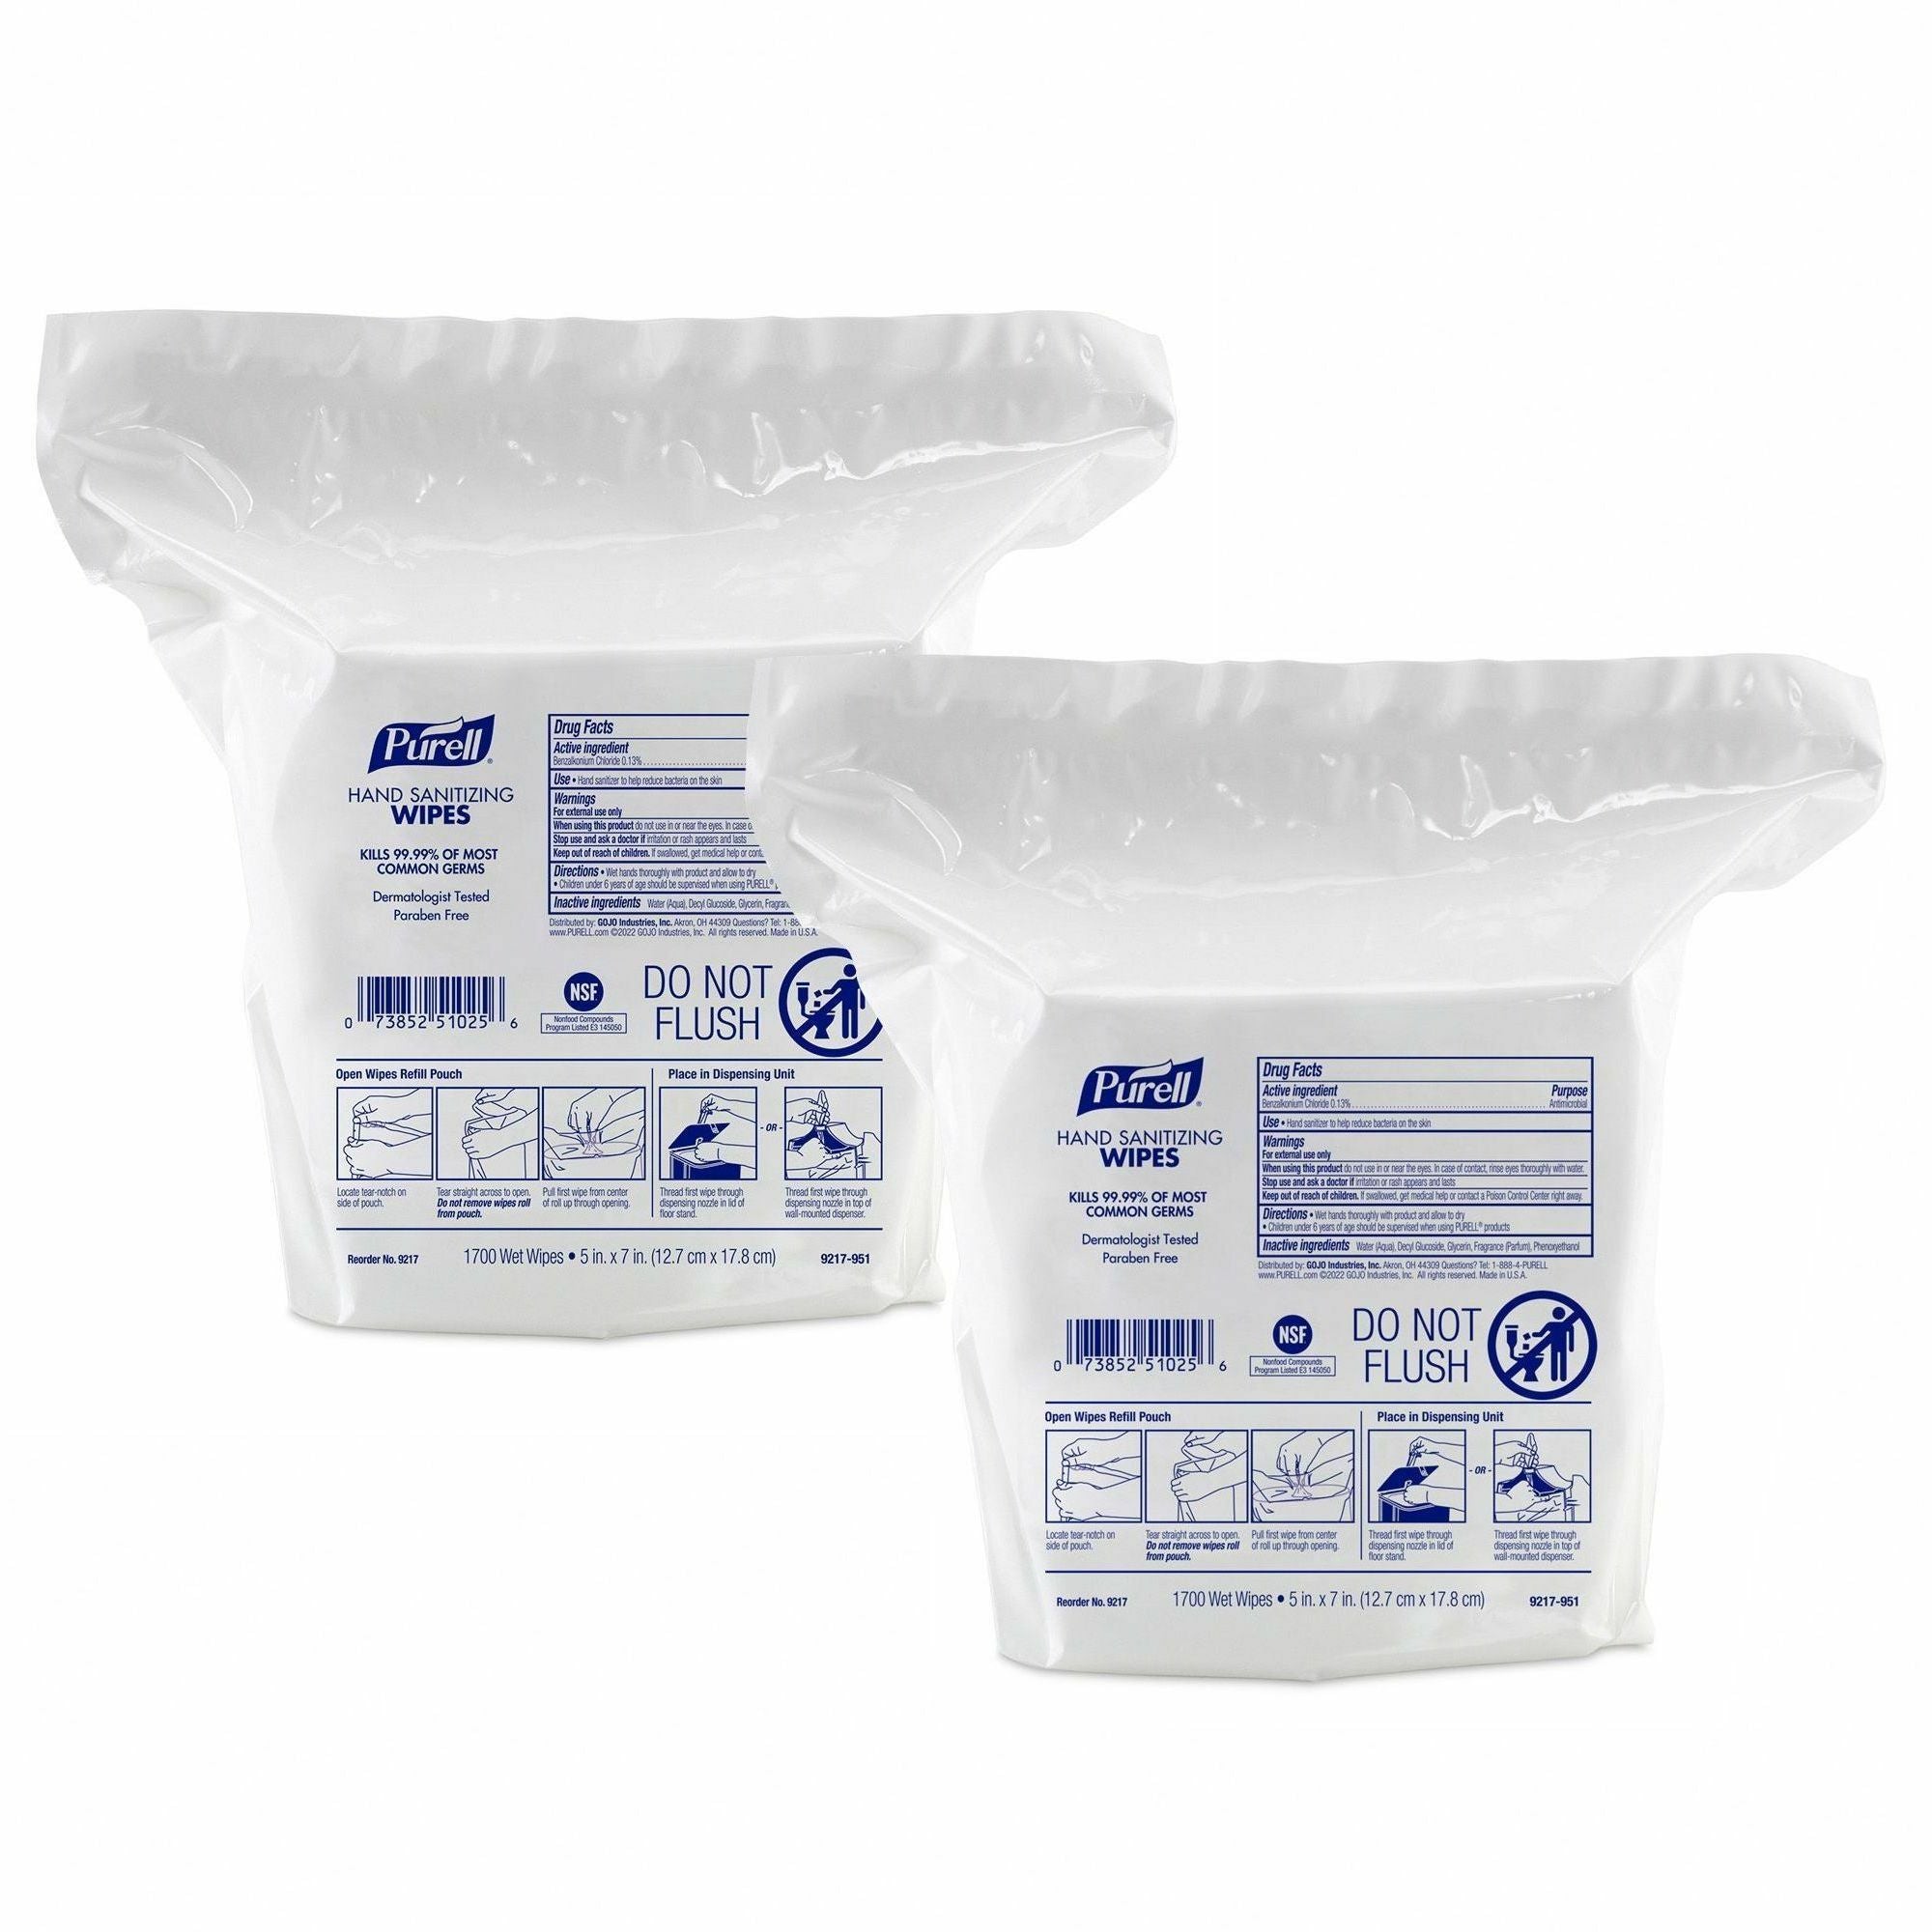 purell-hand-sanitizing-wipes-dispenser-refill-white-durable-textured-lint-free-for-hand-face-1700-per-pack-2-carton_goj921702 - 1